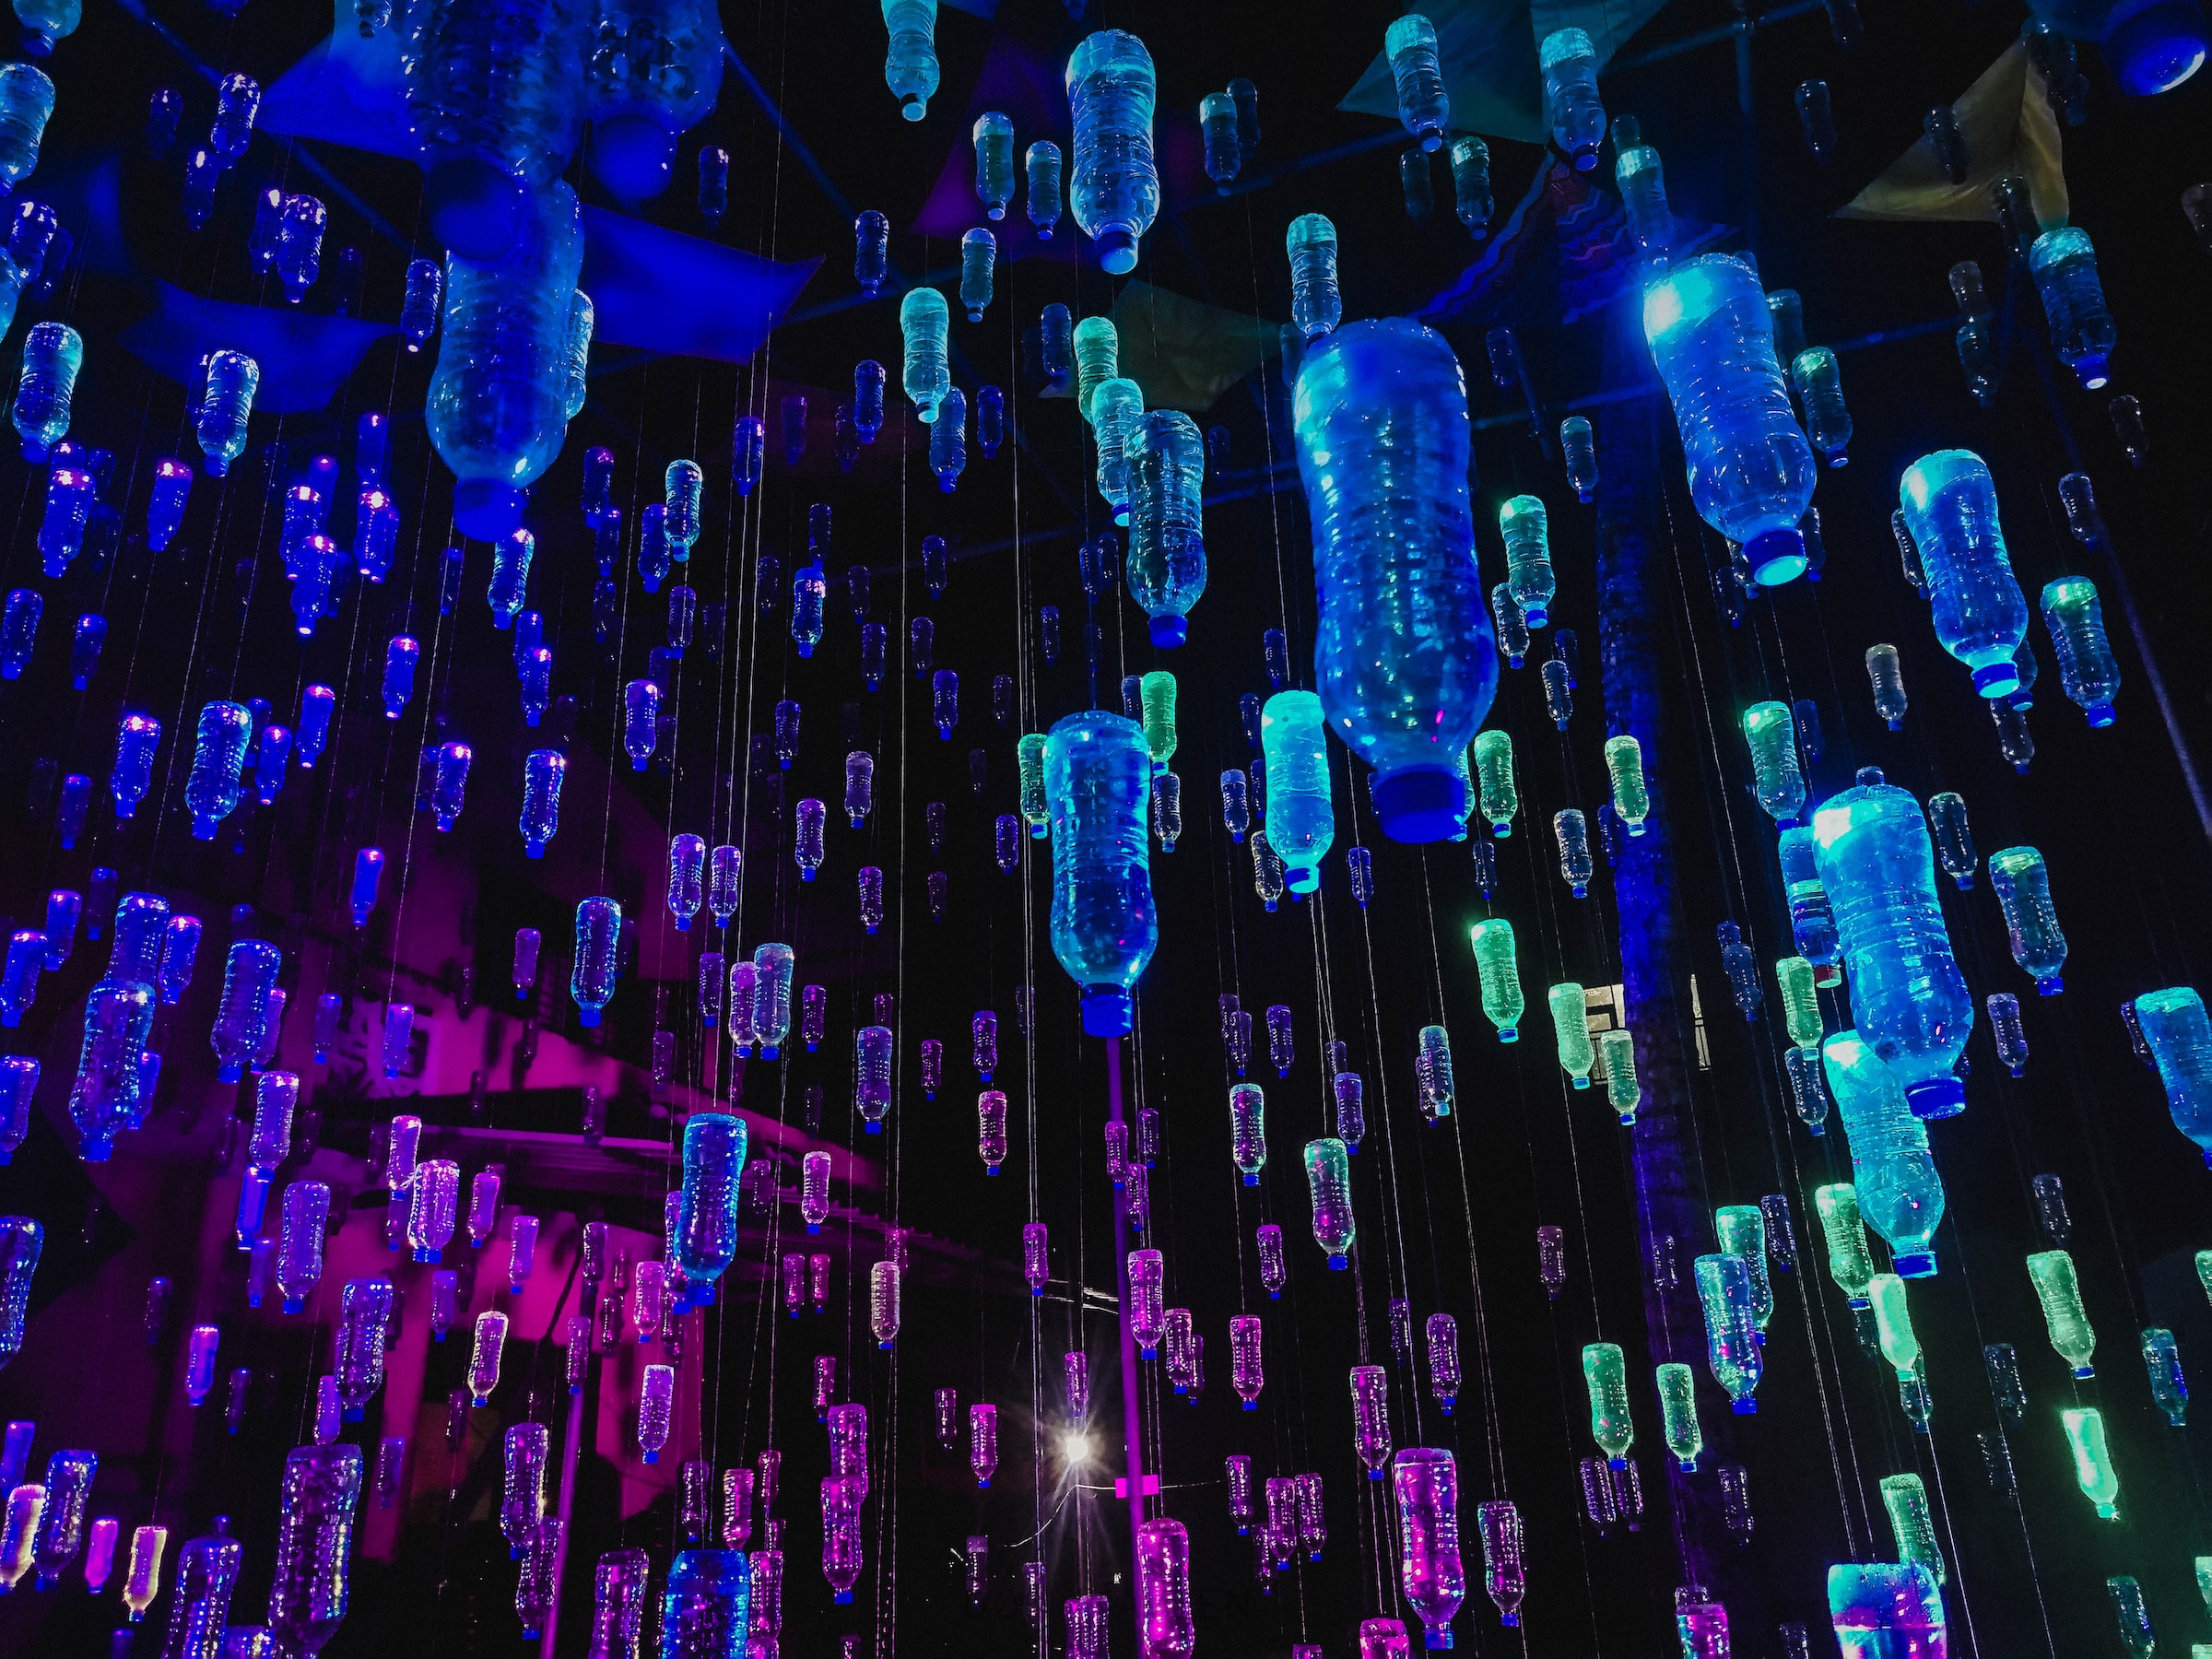 Plastic water bottles hung upside-down in colorful light